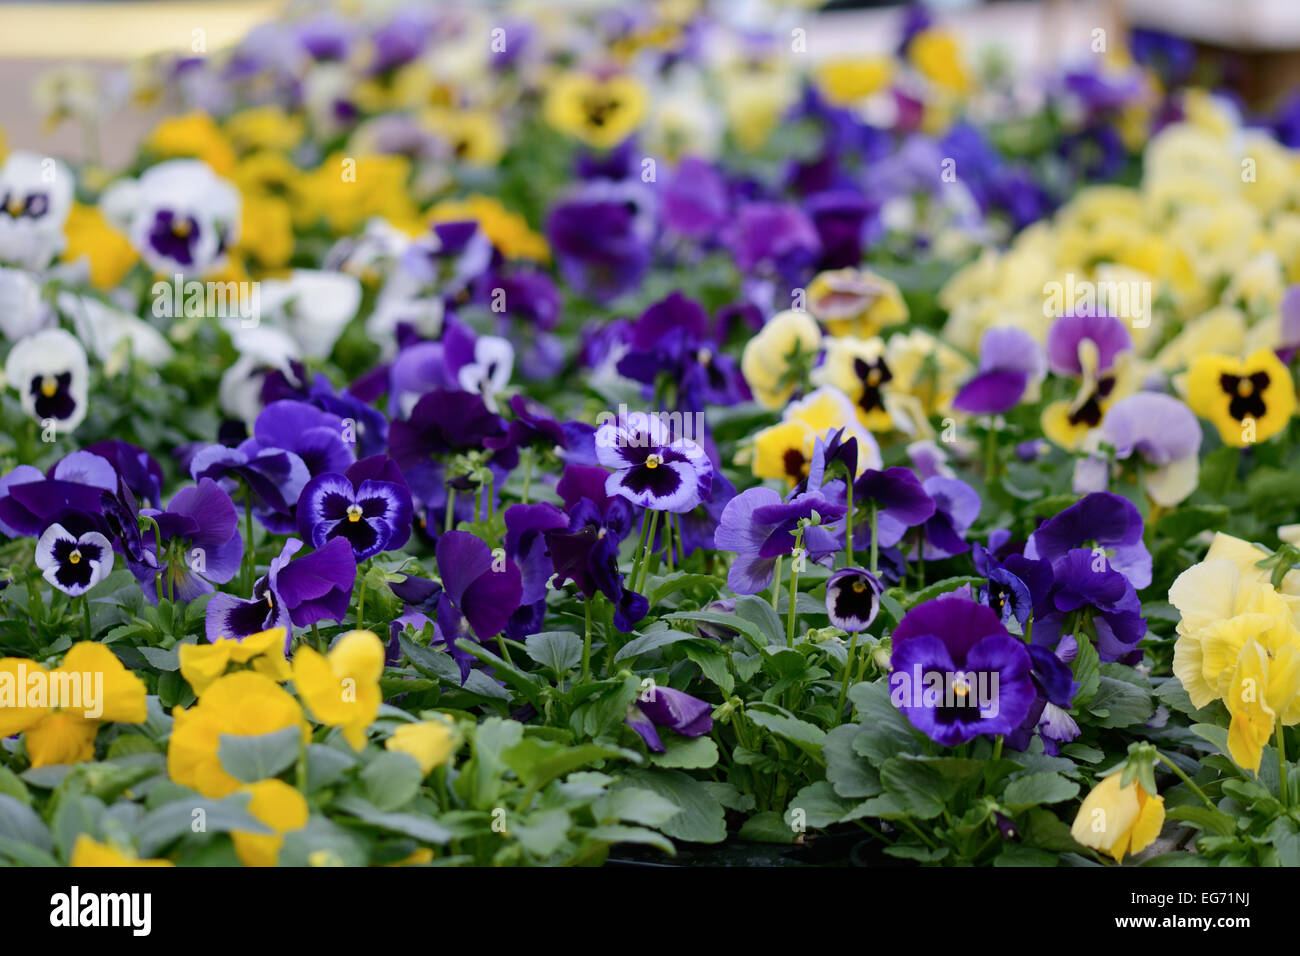 Pansy flowers with vibrant colour - Viola tricolor Stock Photo